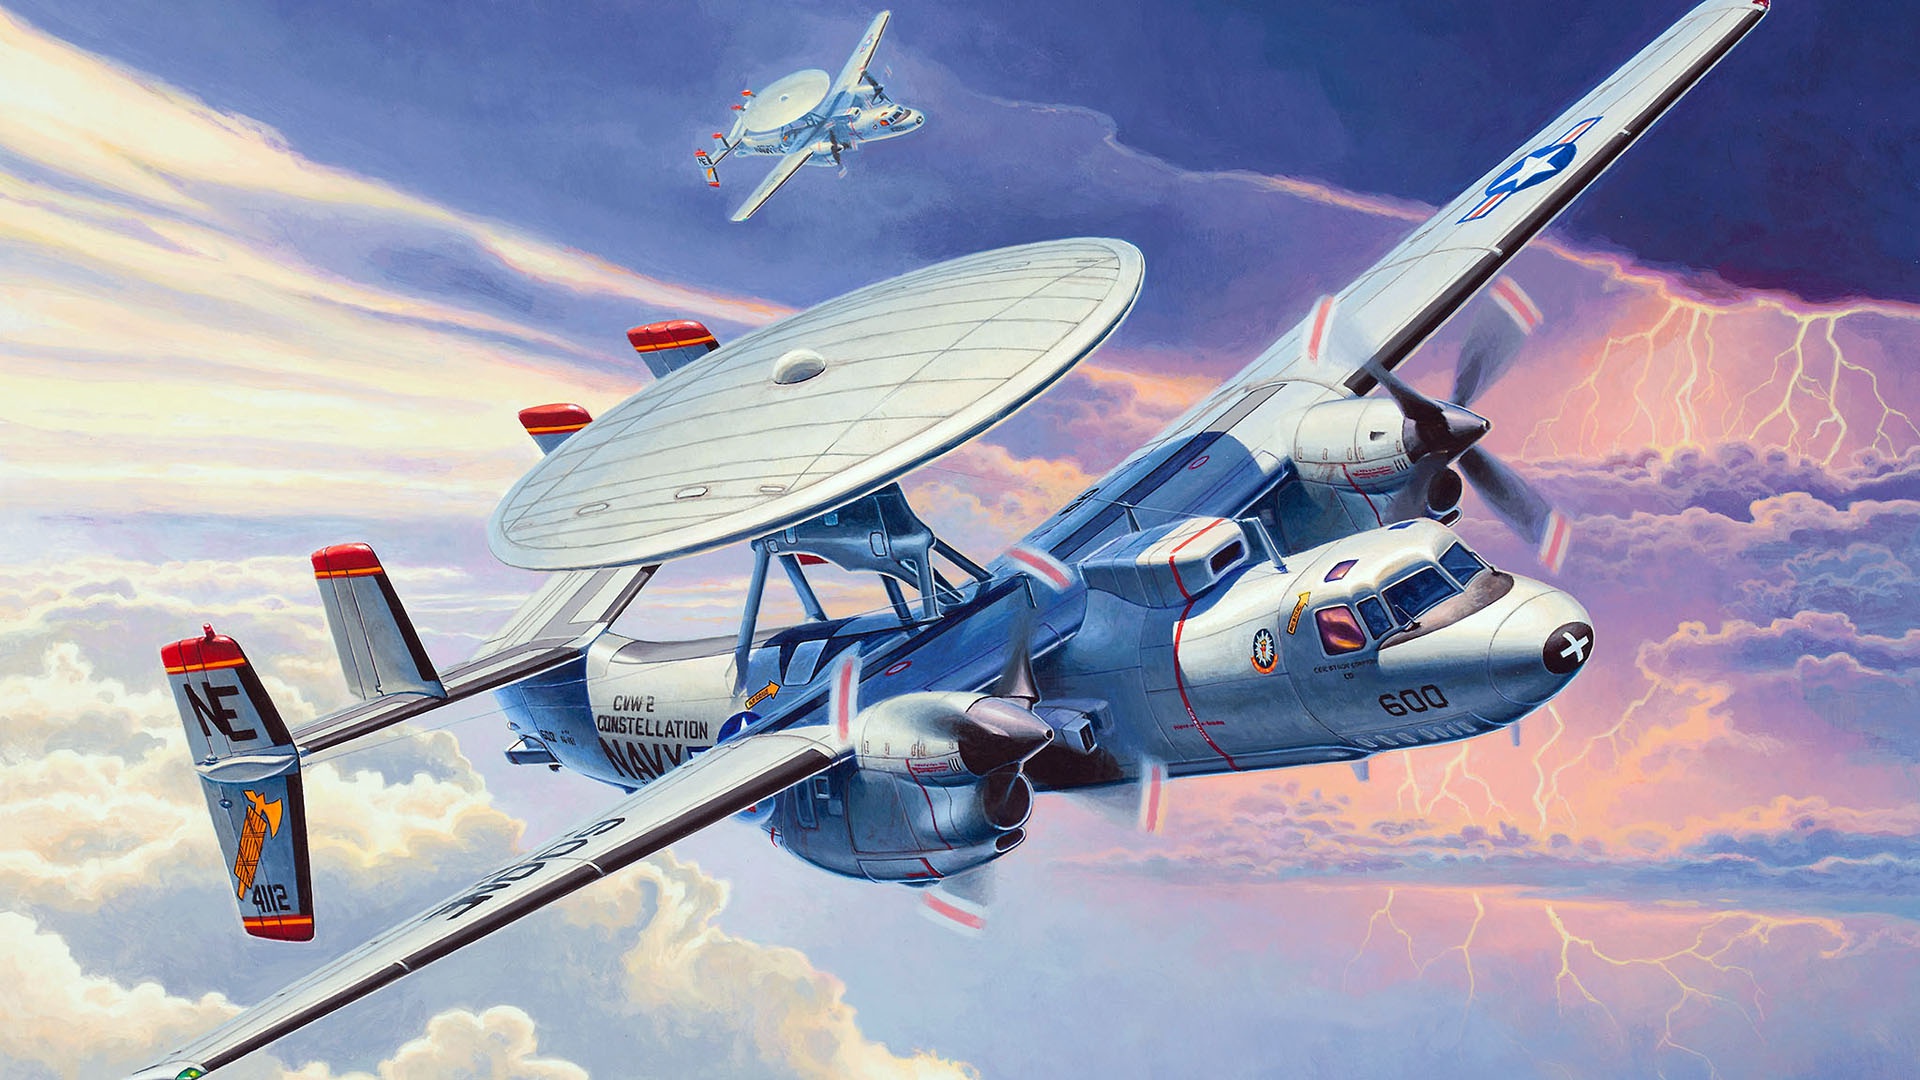 General 1920x1080 Northrop Grumman E-2 Hawkeye artwork aircraft military military aircraft numbers United States Navy Boxart flying storm clouds storm lightning American aircraft Northrop Grumman